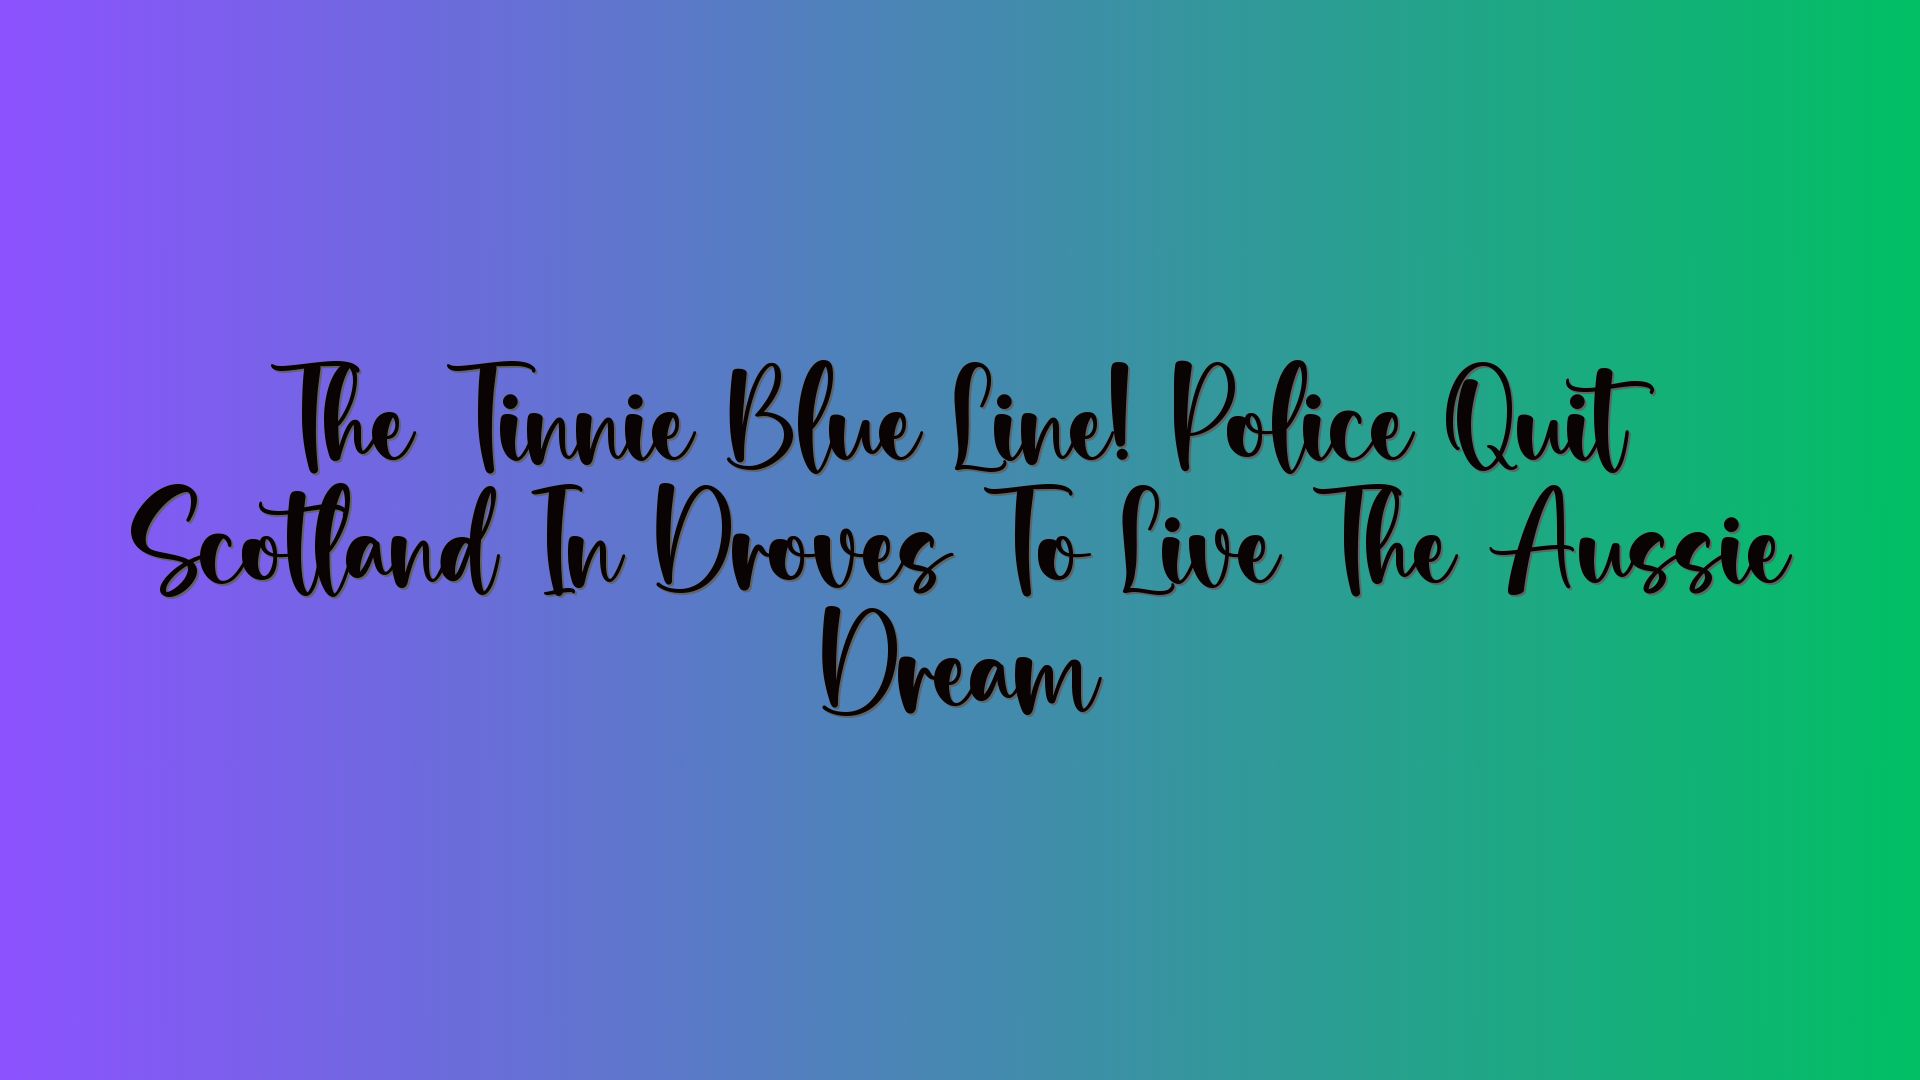 The Tinnie Blue Line! Police Quit Scotland In Droves To Live The Aussie Dream